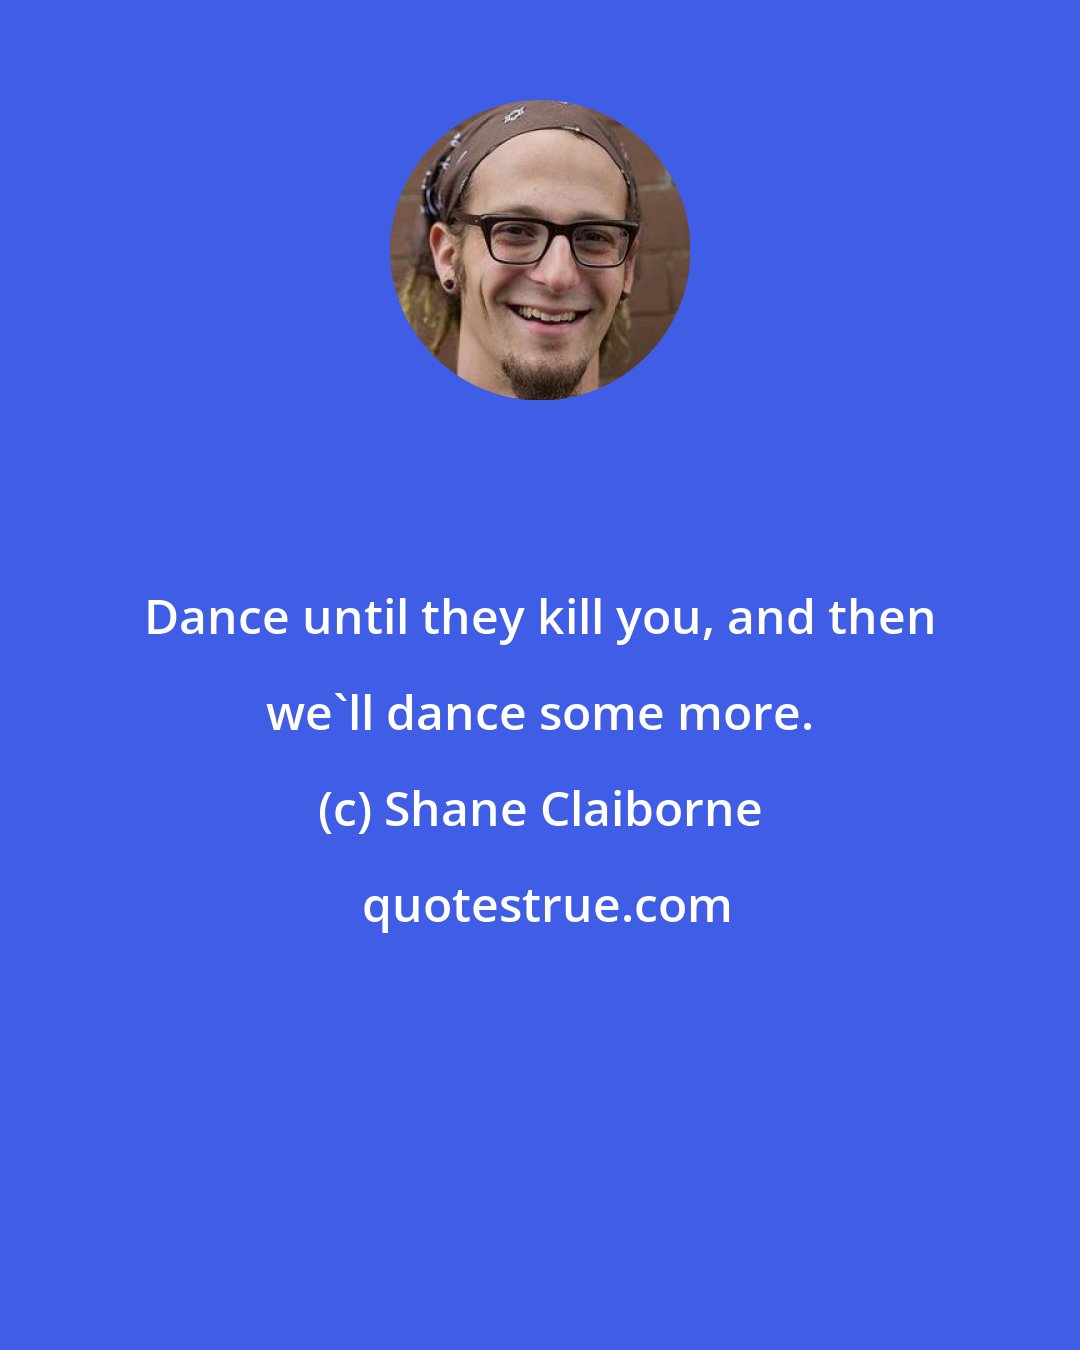 Shane Claiborne: Dance until they kill you, and then we'll dance some more.